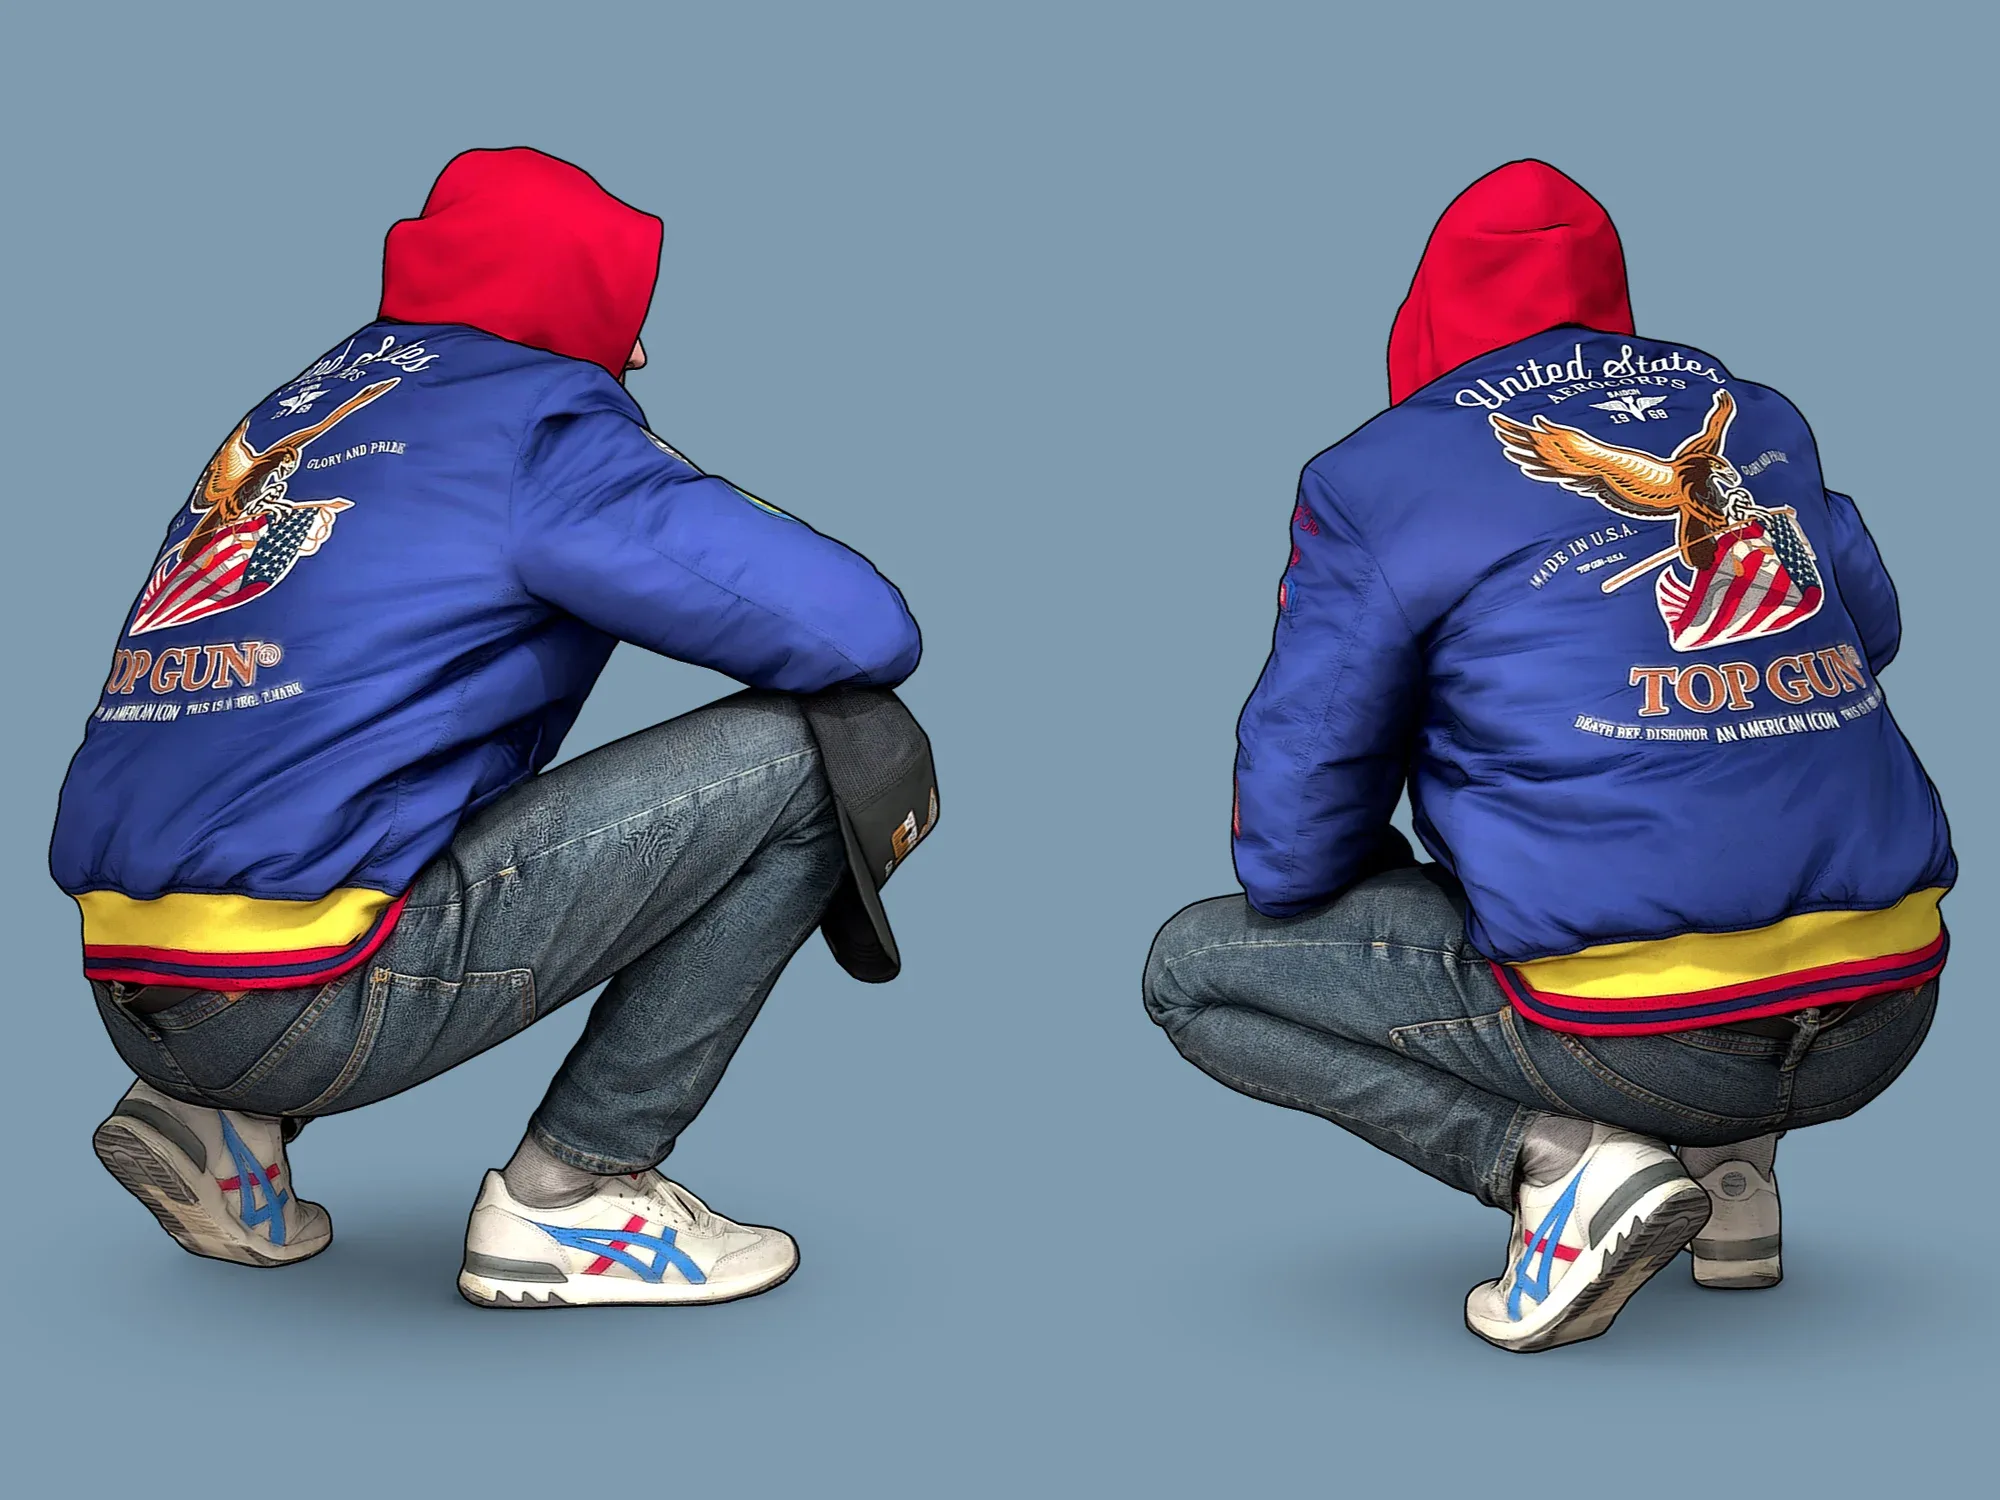 Cheeky Guy in a Blue Bomber Jacket Squatting